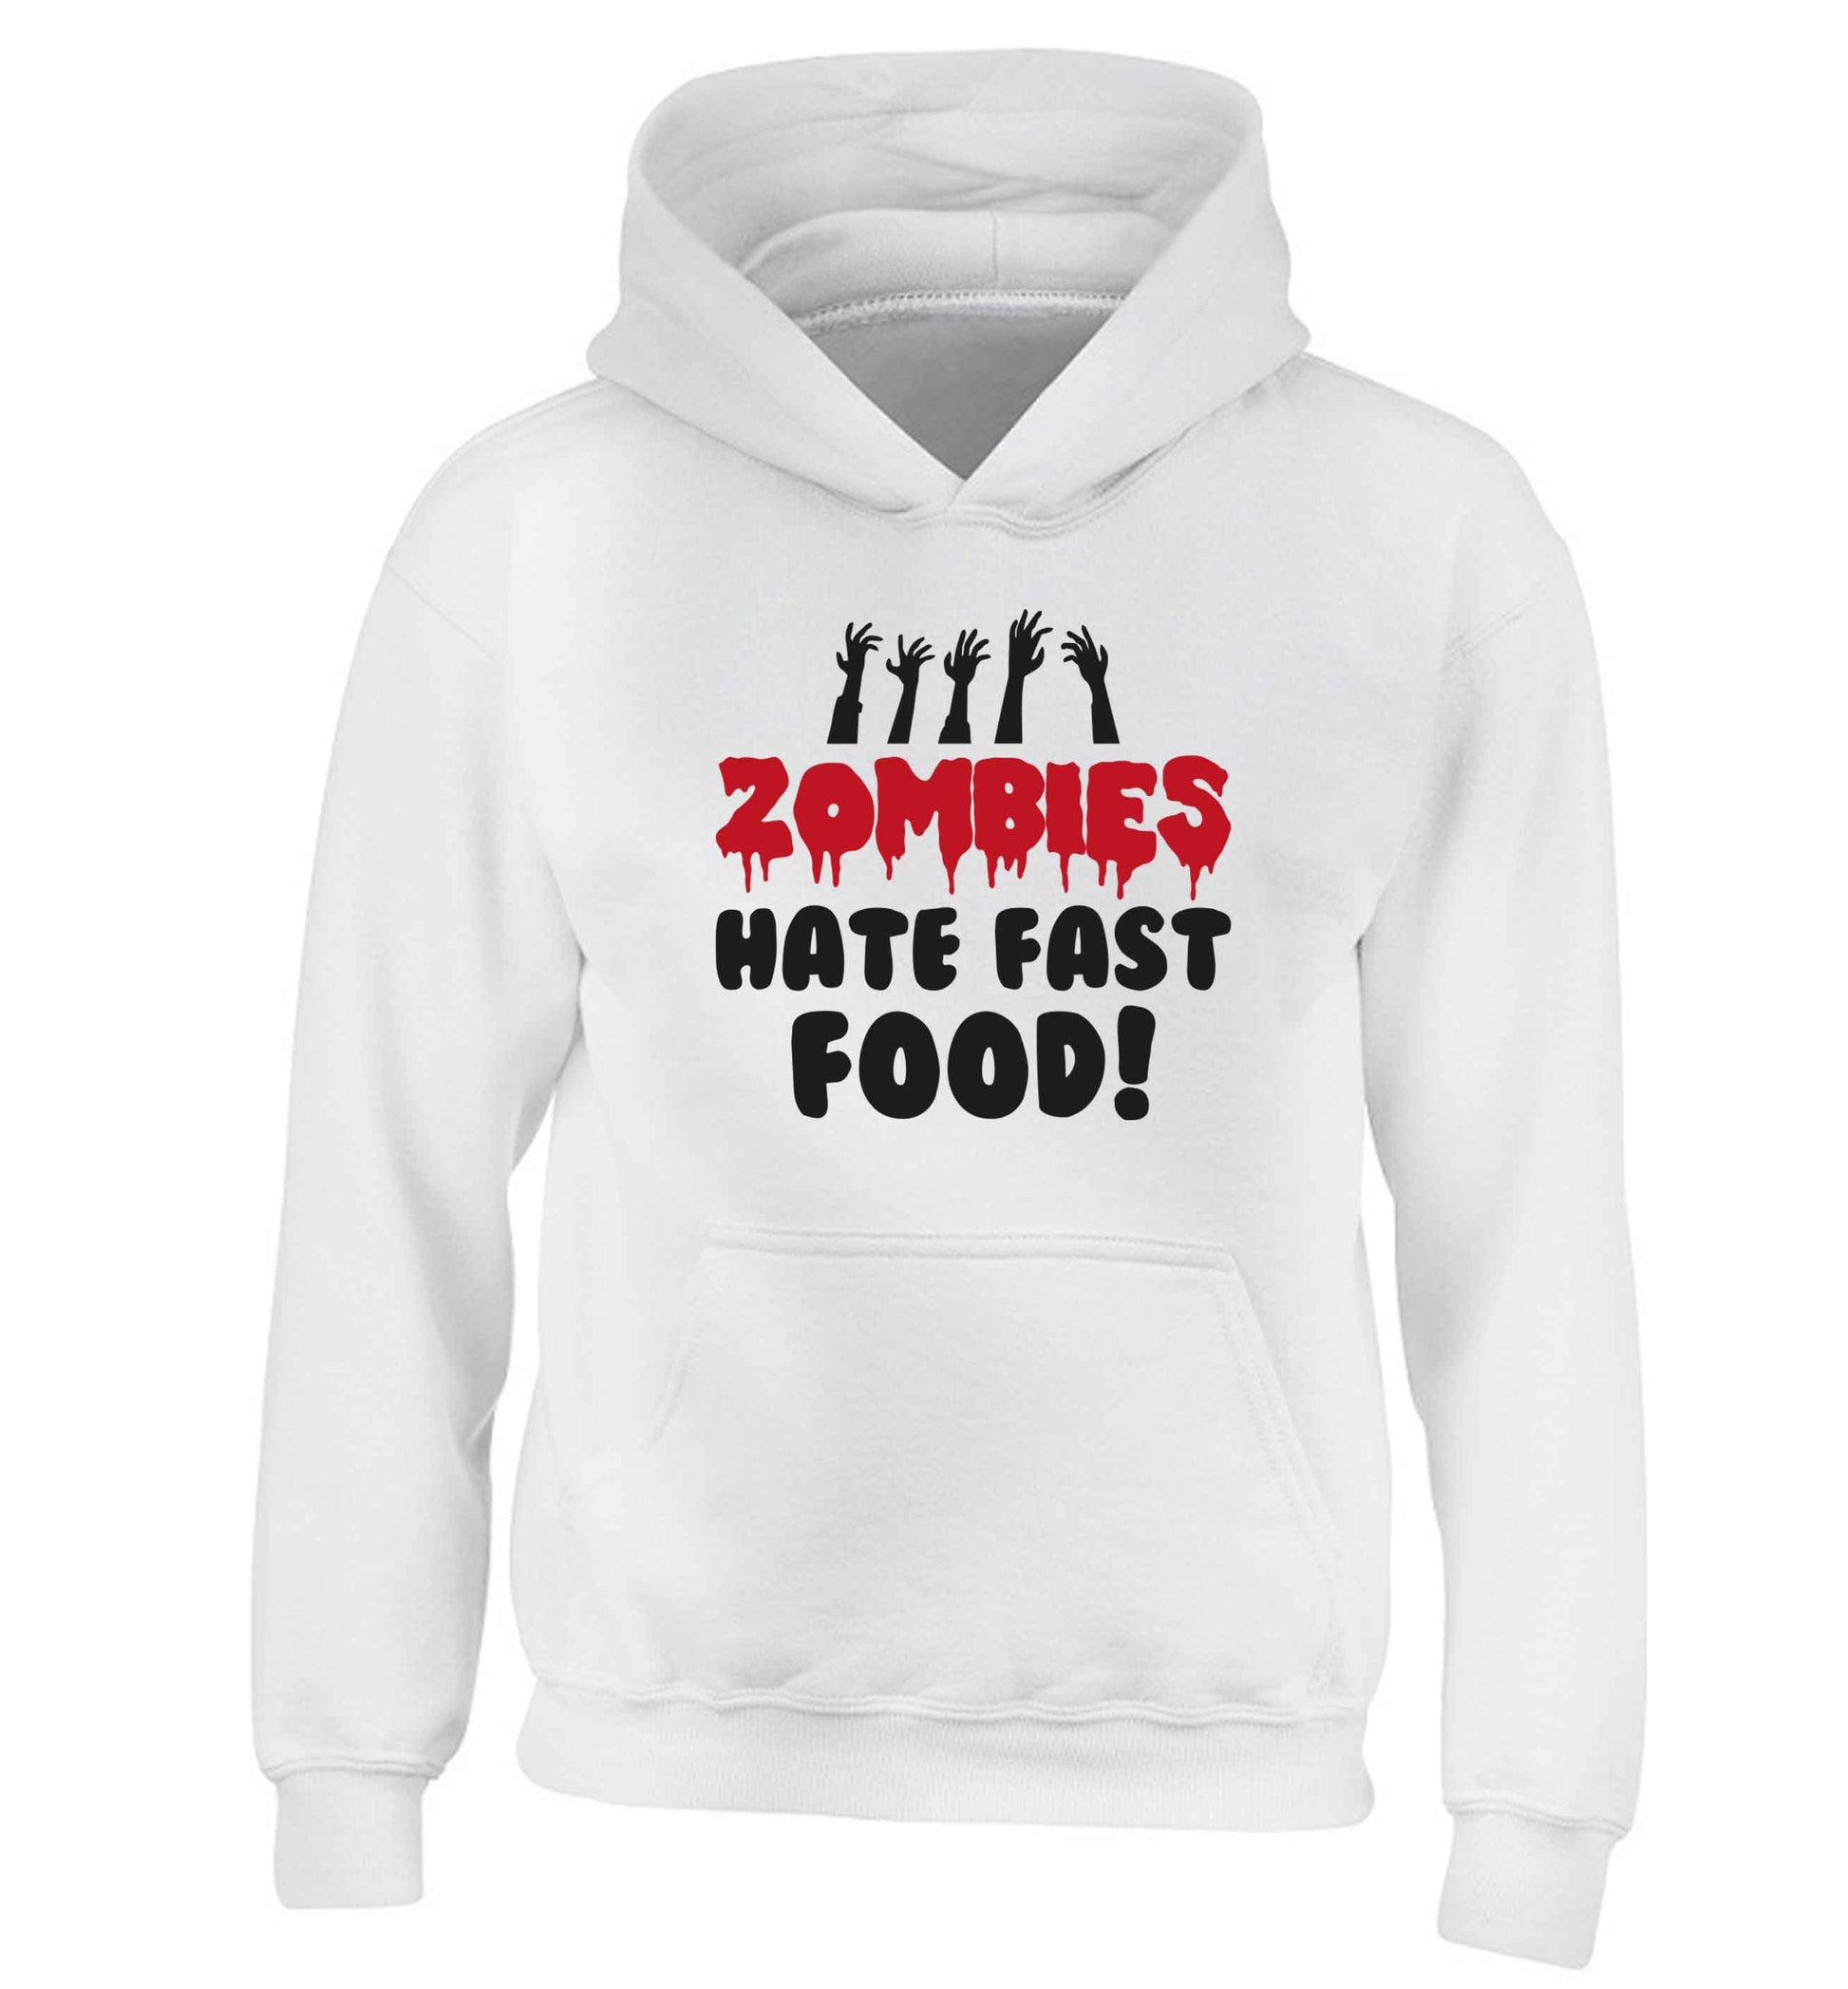 Zombies hate fast food children's white hoodie 12-13 Years